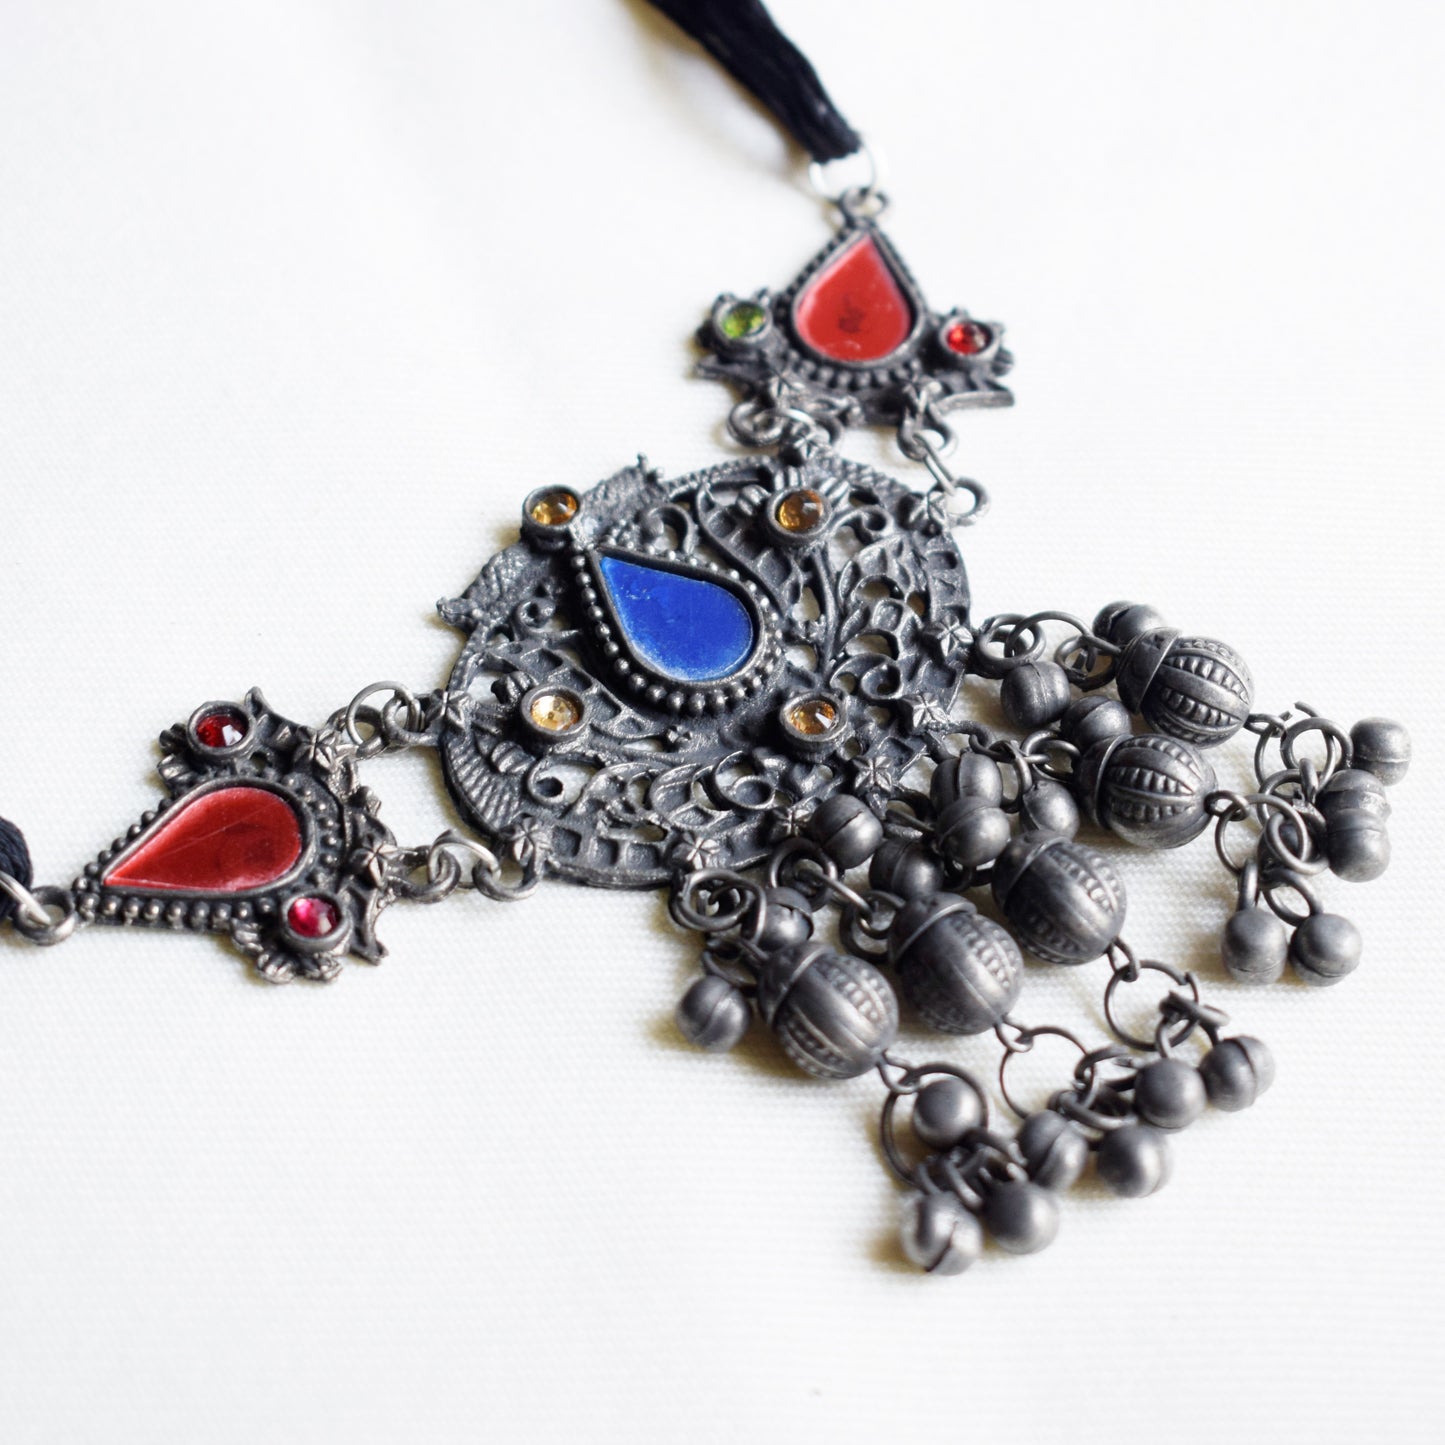 Antique Afghani Silver Oxidised Half Choker Necklace with Earrings